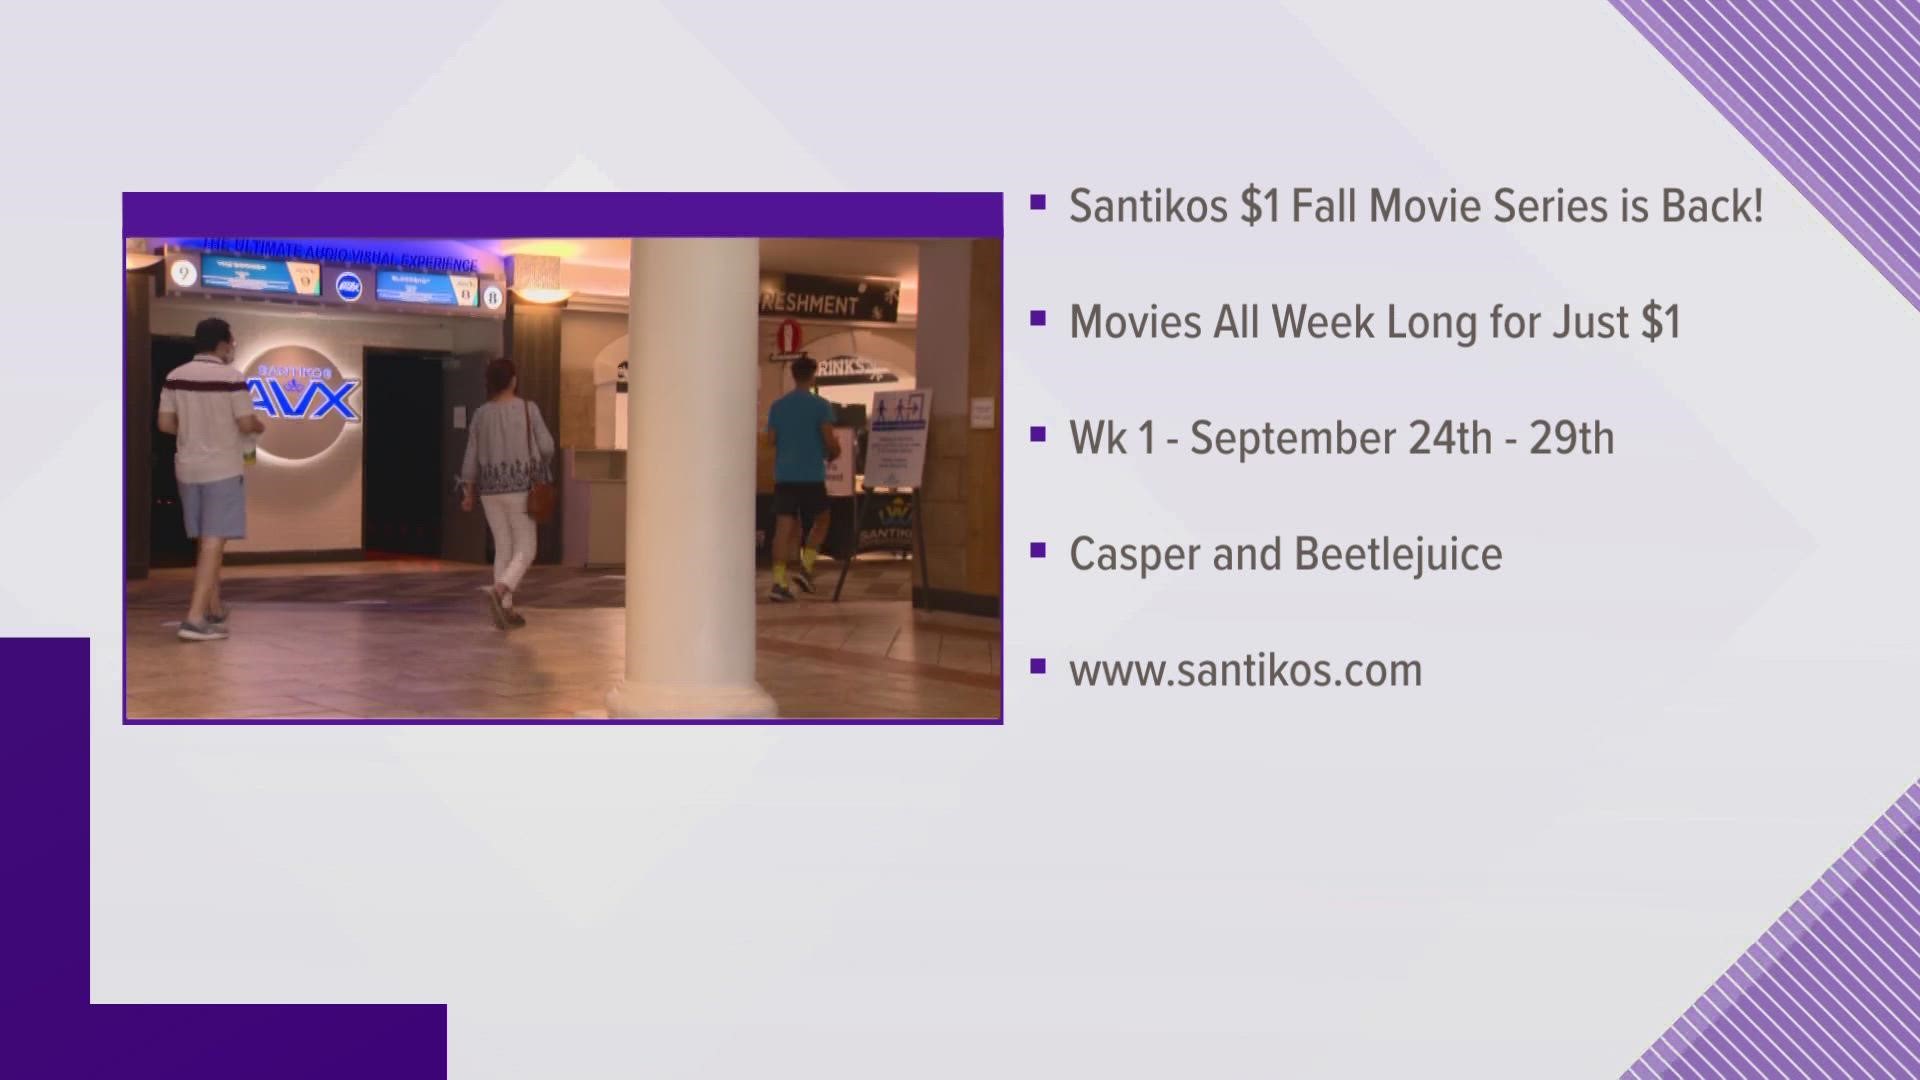 Between Sept. 23-29, you can catch Casper and Beetlejuice for $1 at every Santikos location except for Silverado.